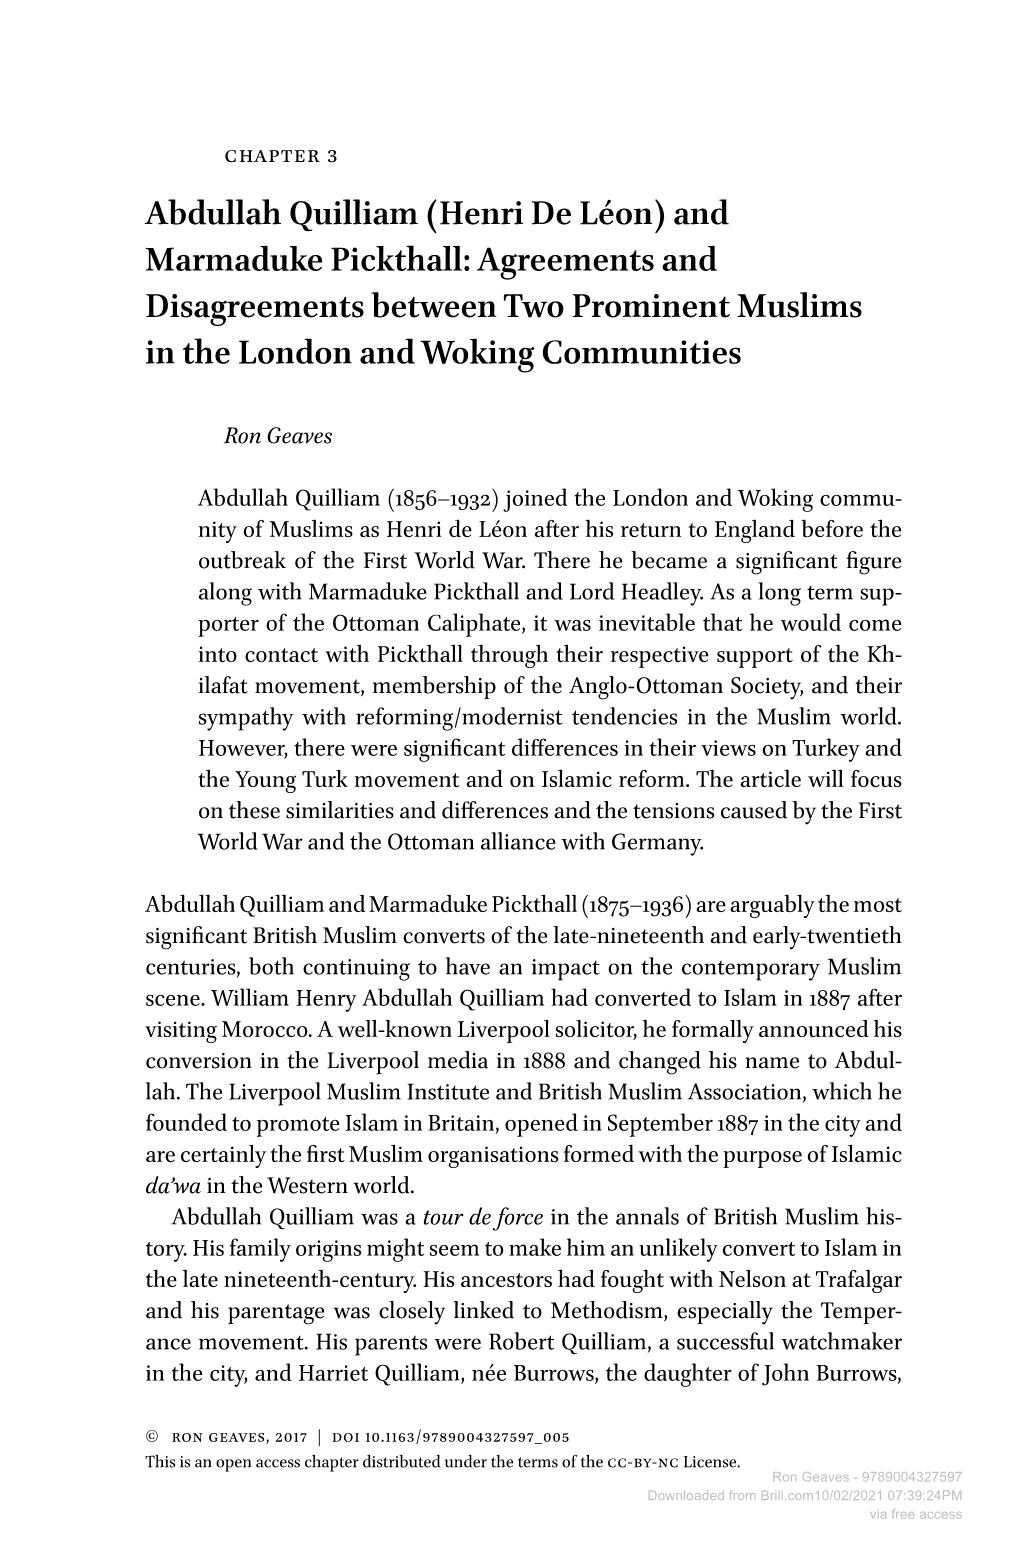 Abdullah Quilliam (Henri De Léon) and Marmaduke Pickthall: Agreements and Disagreements Between Two Prominent Muslims in the London and Woking Communities